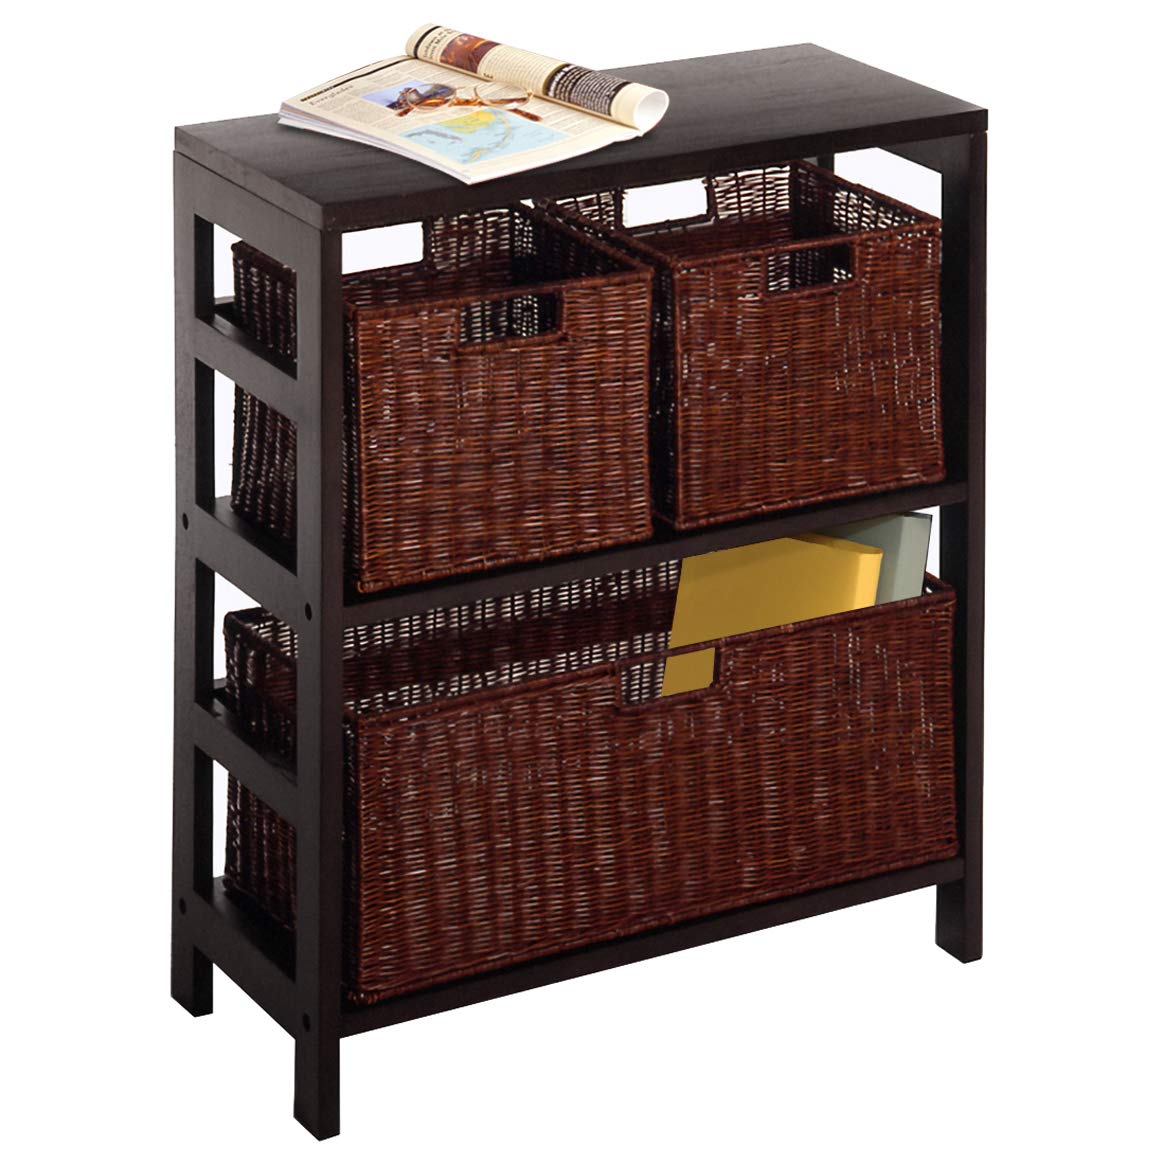 Winsome Wood Leo Wood 3 Tier Shelf with 3 Rattan Baskets - 1 Large; 2 Small in Espresso Finish